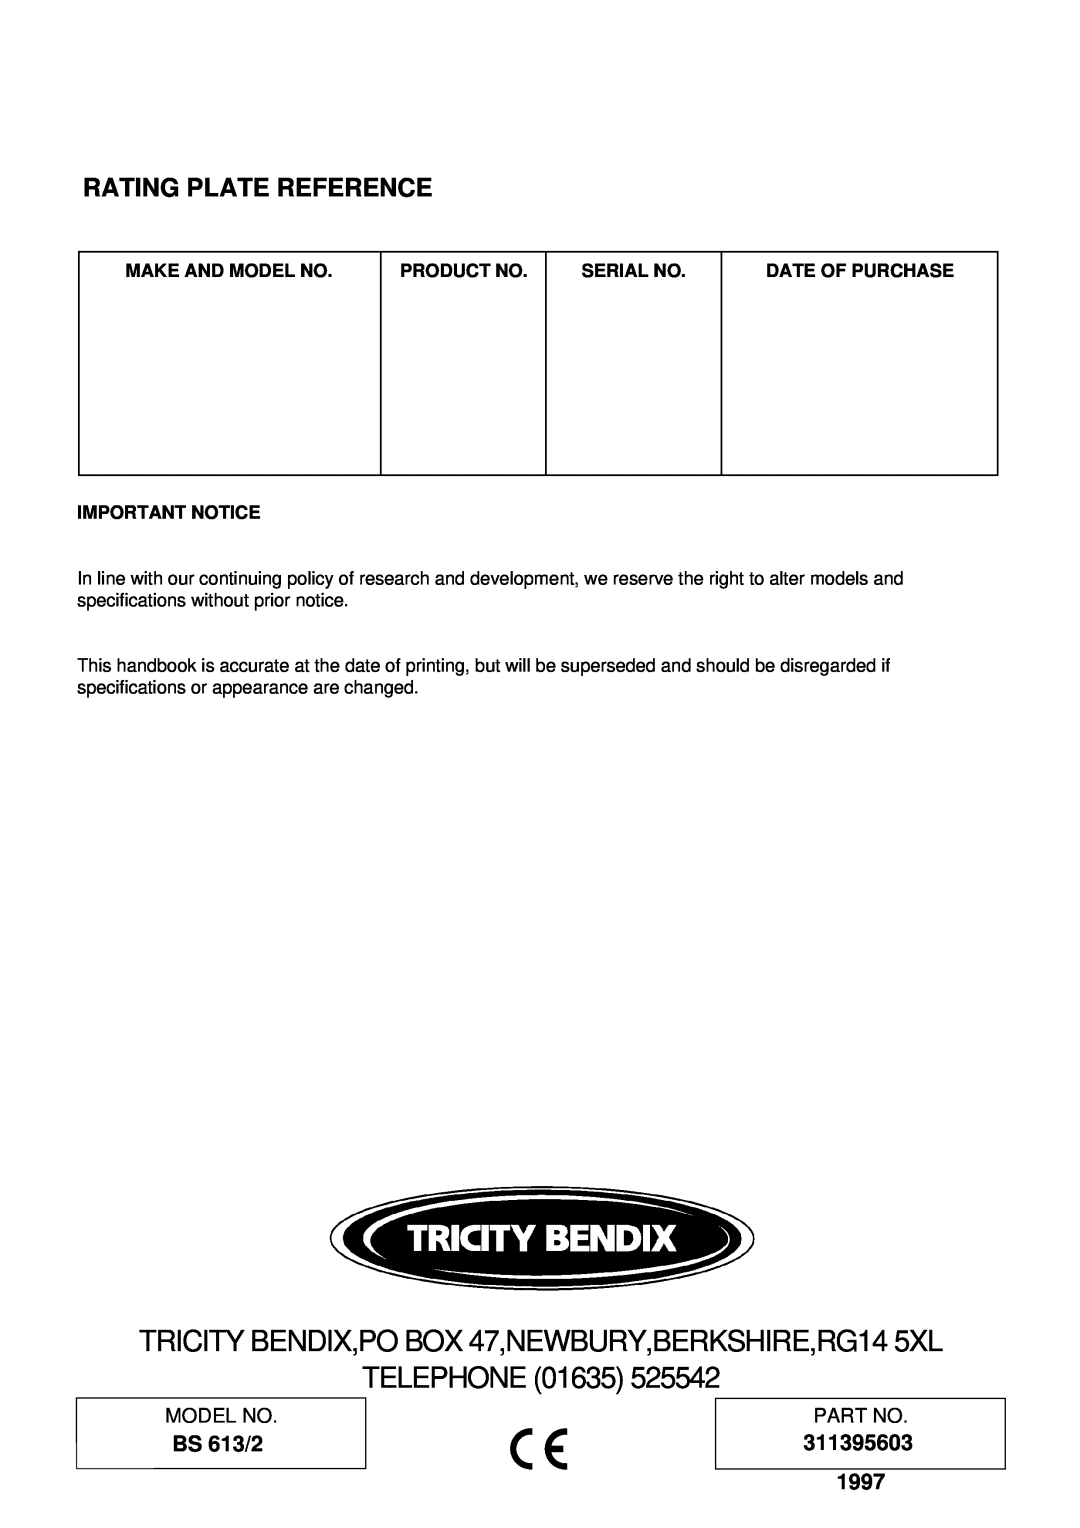 Tricity Bendix BS 613/2 Rating Plate Reference, 311395603 1997, Make And Model No, Product No, Serial No 